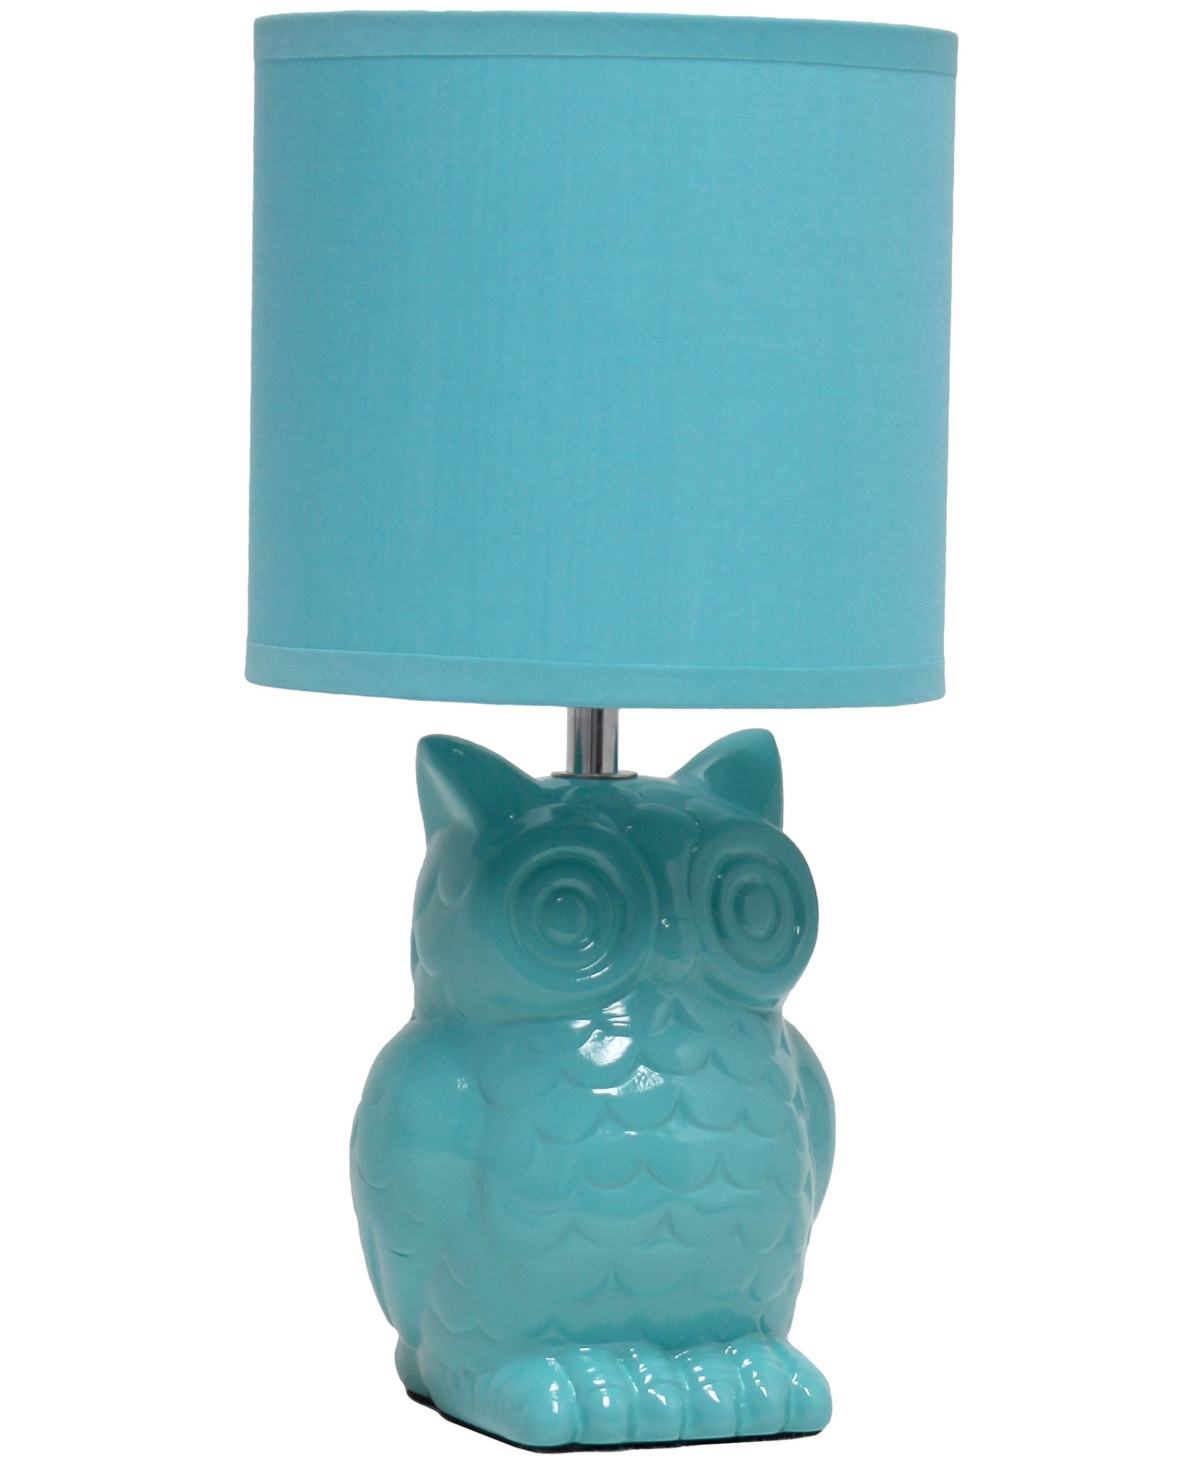 Shop Simple Designs 12.8" Tall Contemporary Ceramic Owl Bedside Table Desk Lamp With Matching Fabric Shade In Tiffany Blue